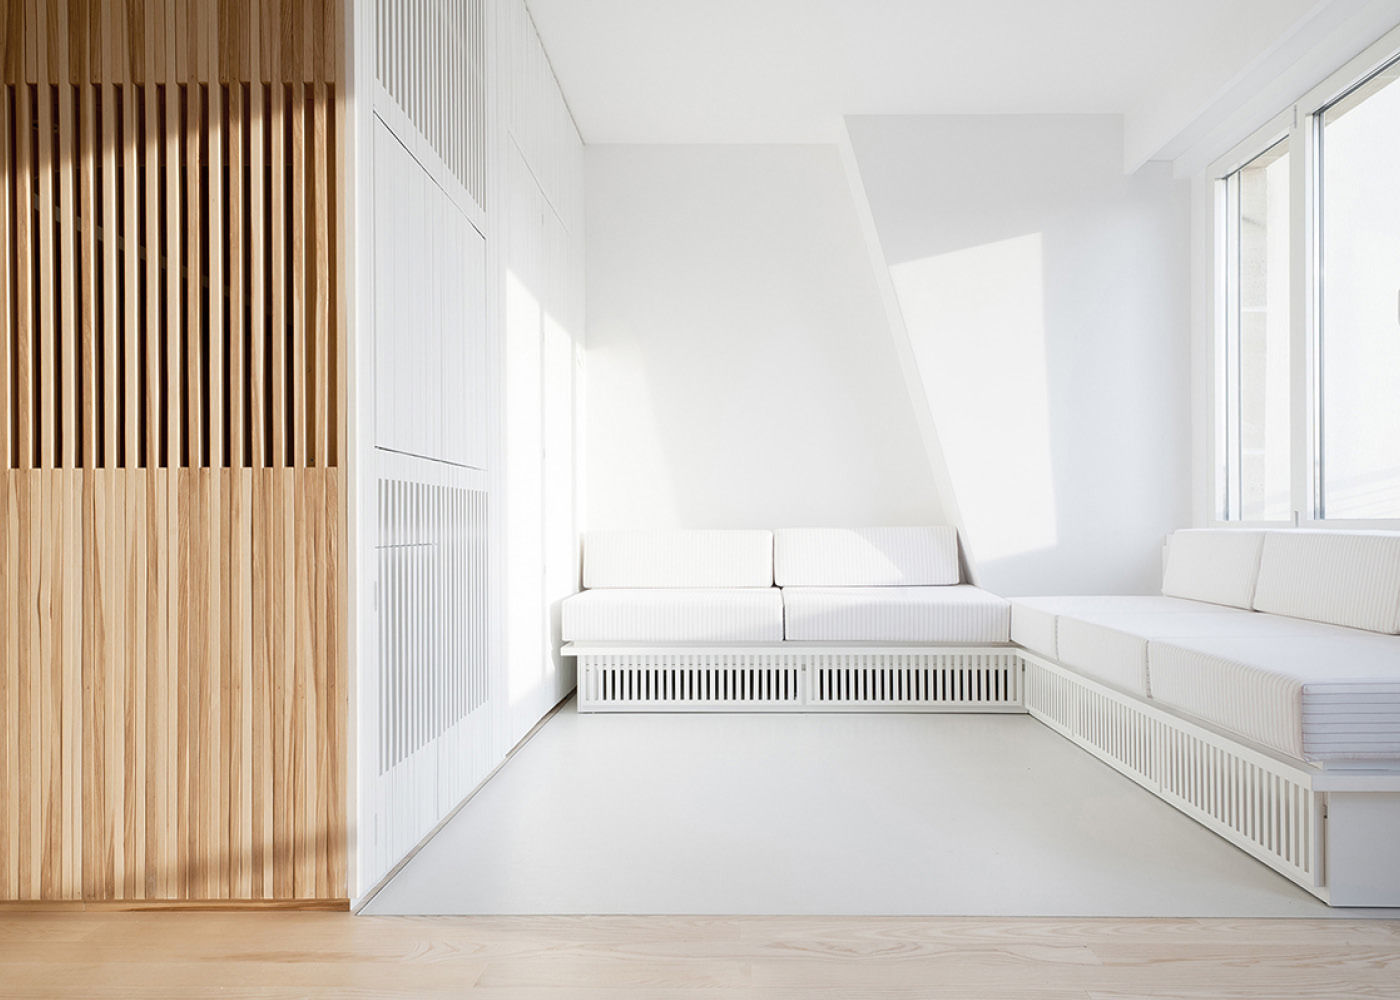 Flat N°4. A small ap, Julien Joly Architecture Julien Joly Architecture ห้องนั่งเล่น